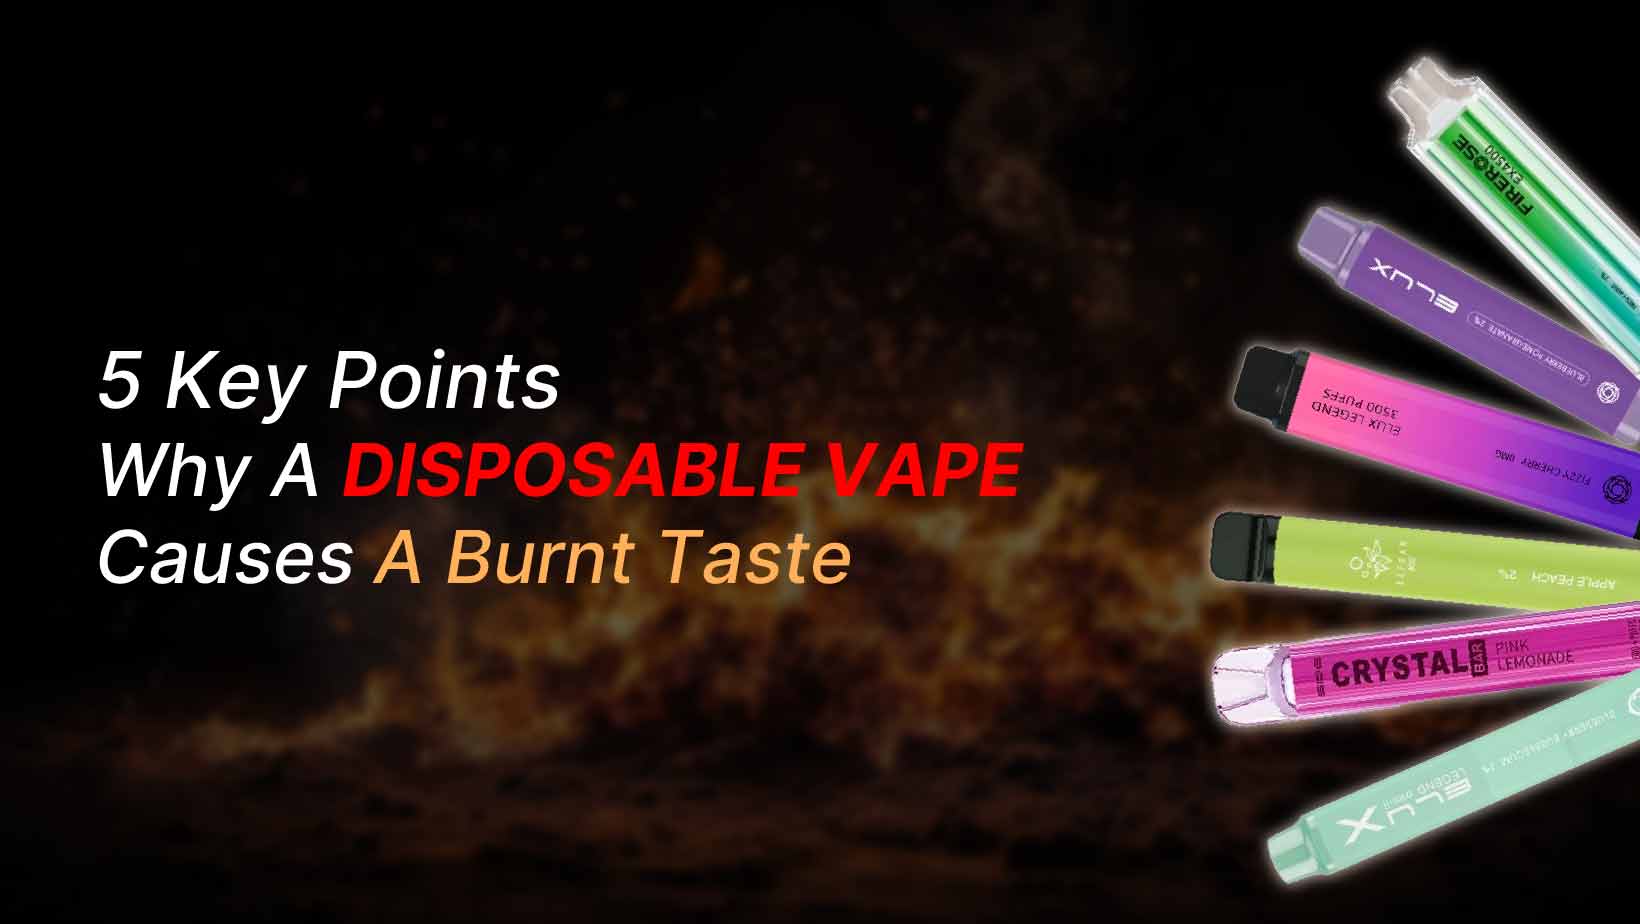 5 Key Points Why A Disposable Vape Causes A Burnt Taste